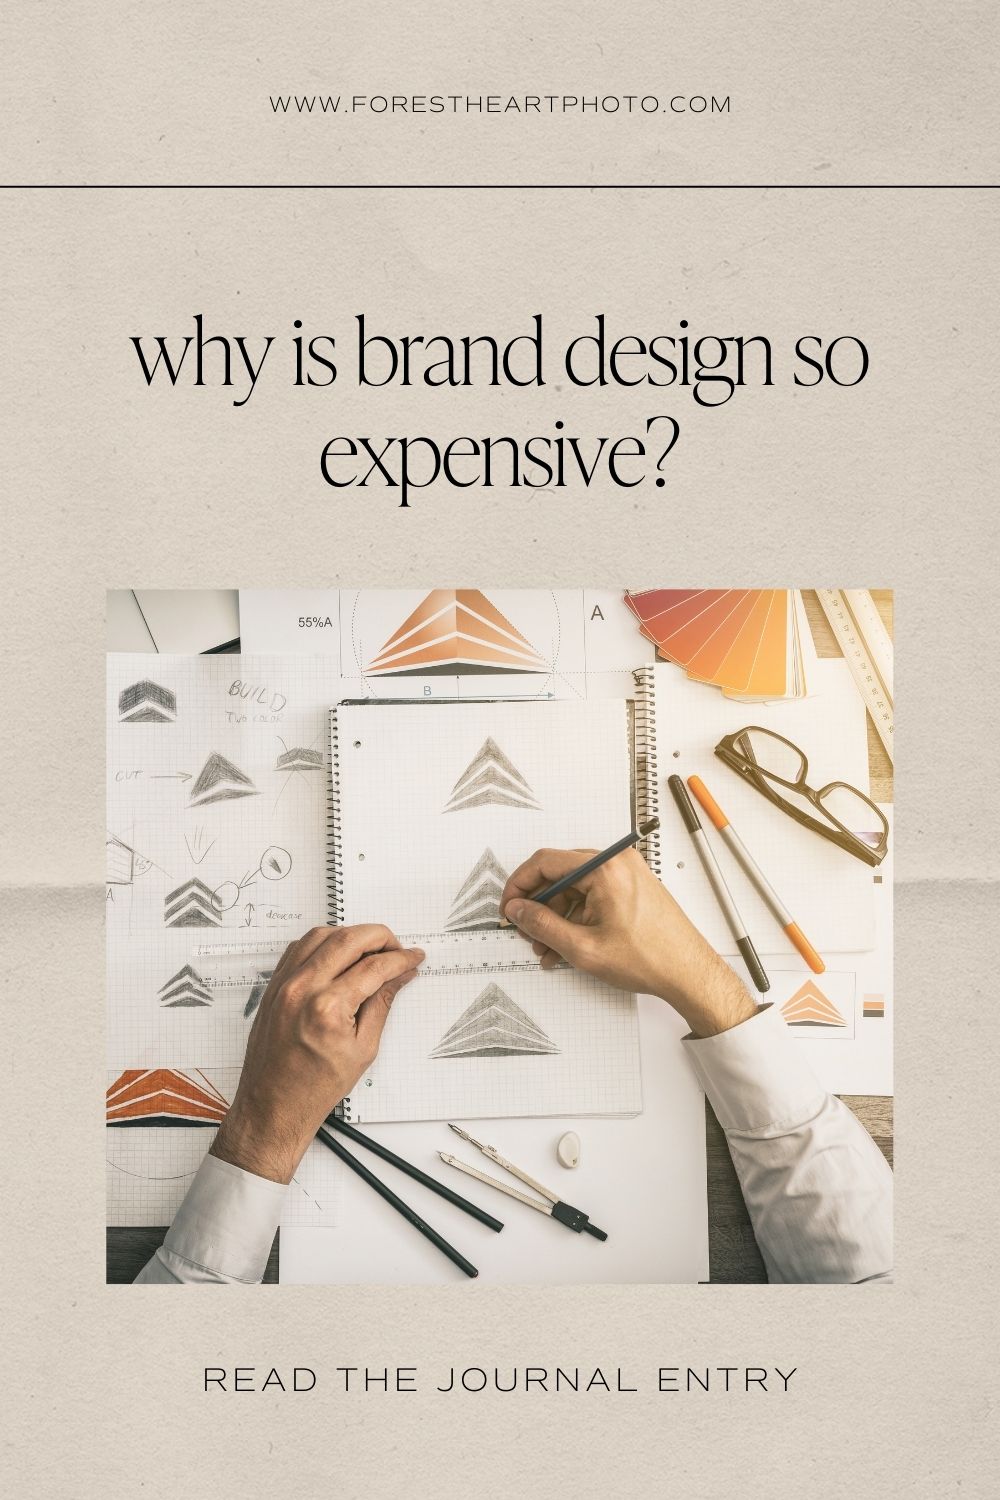 why is brand design so expensive?